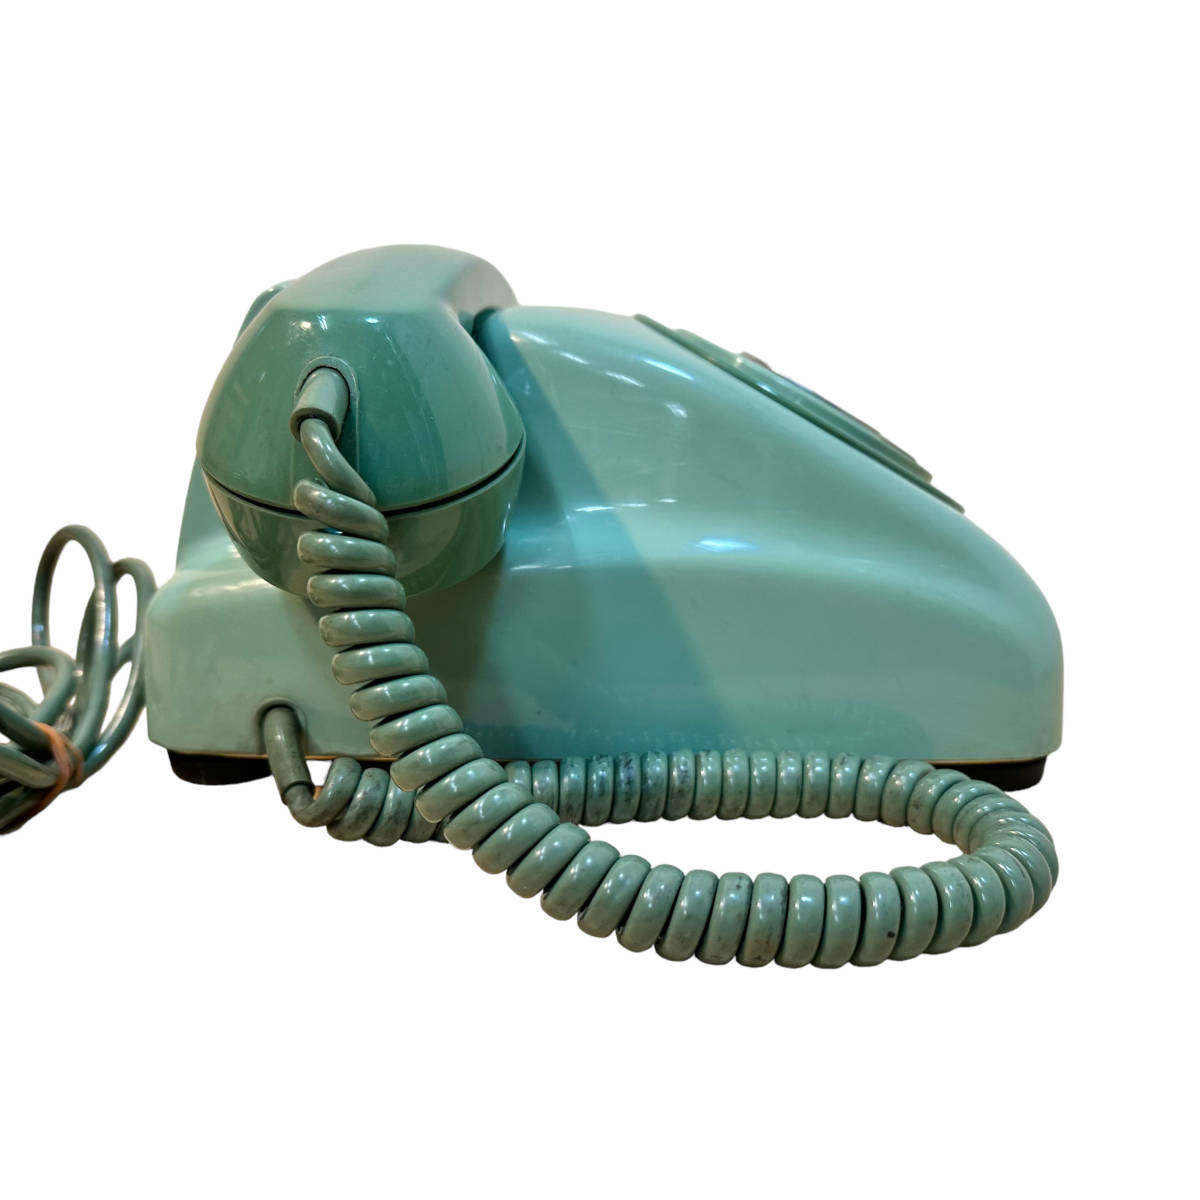 23T386_ji2 that time thing Toshiba dial type telephone machine 600-A2 color (G) 77 green retro objet d'art interior antique electro- electro- . company black telephone color telephone 